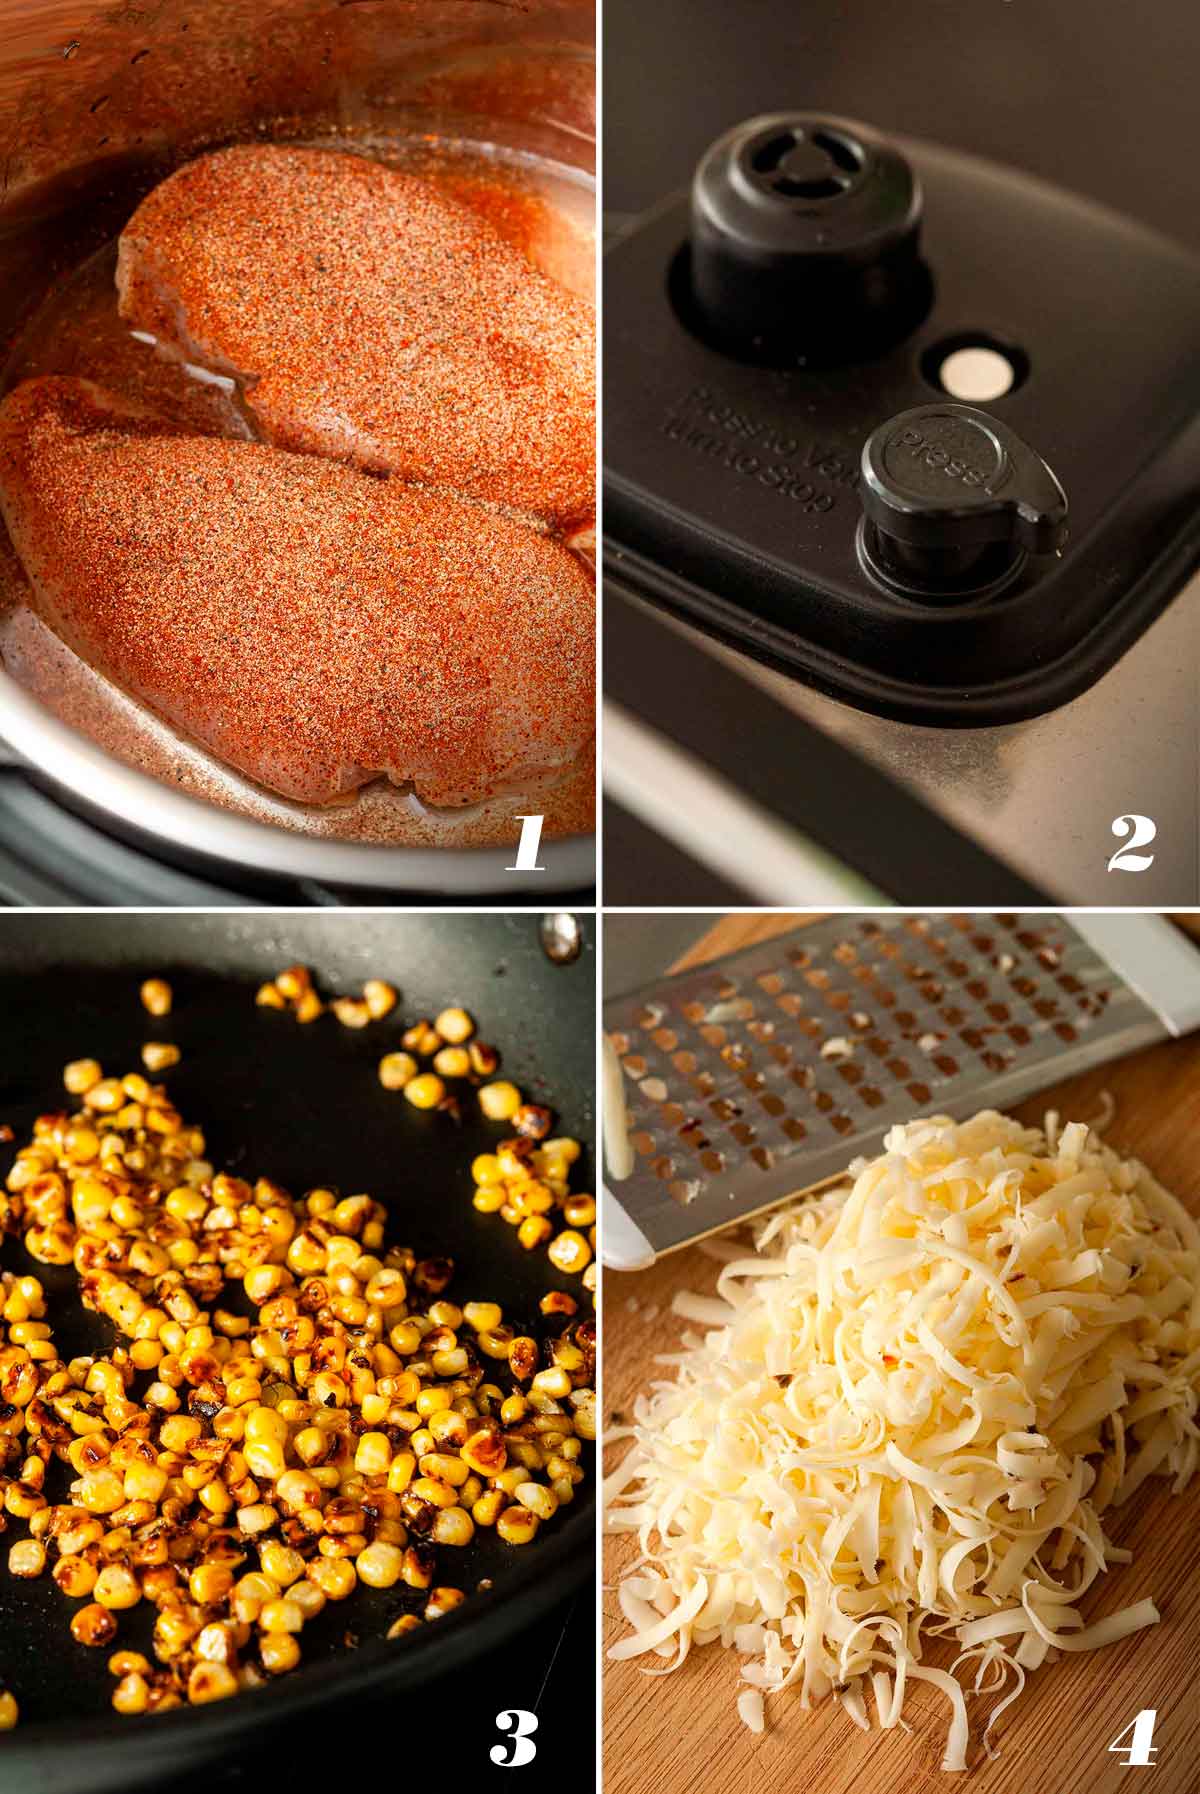 A collage of 4 numbered images showing how to prepare chicken enchiladas.